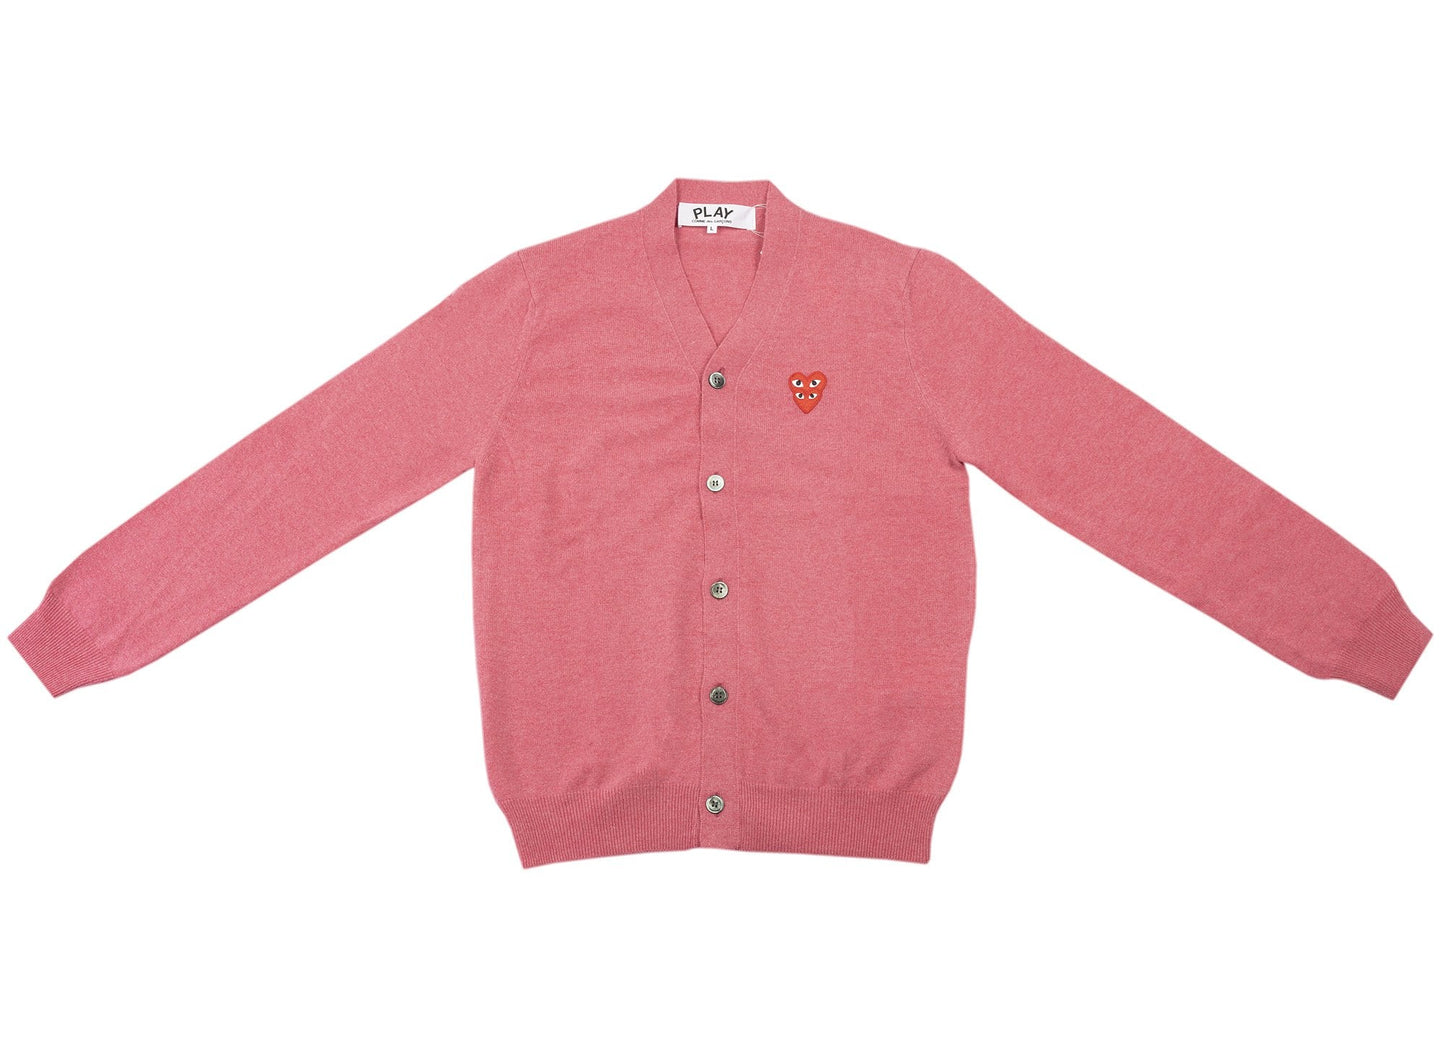 Comme des Garçons Play Double Heart Cardigan in Red